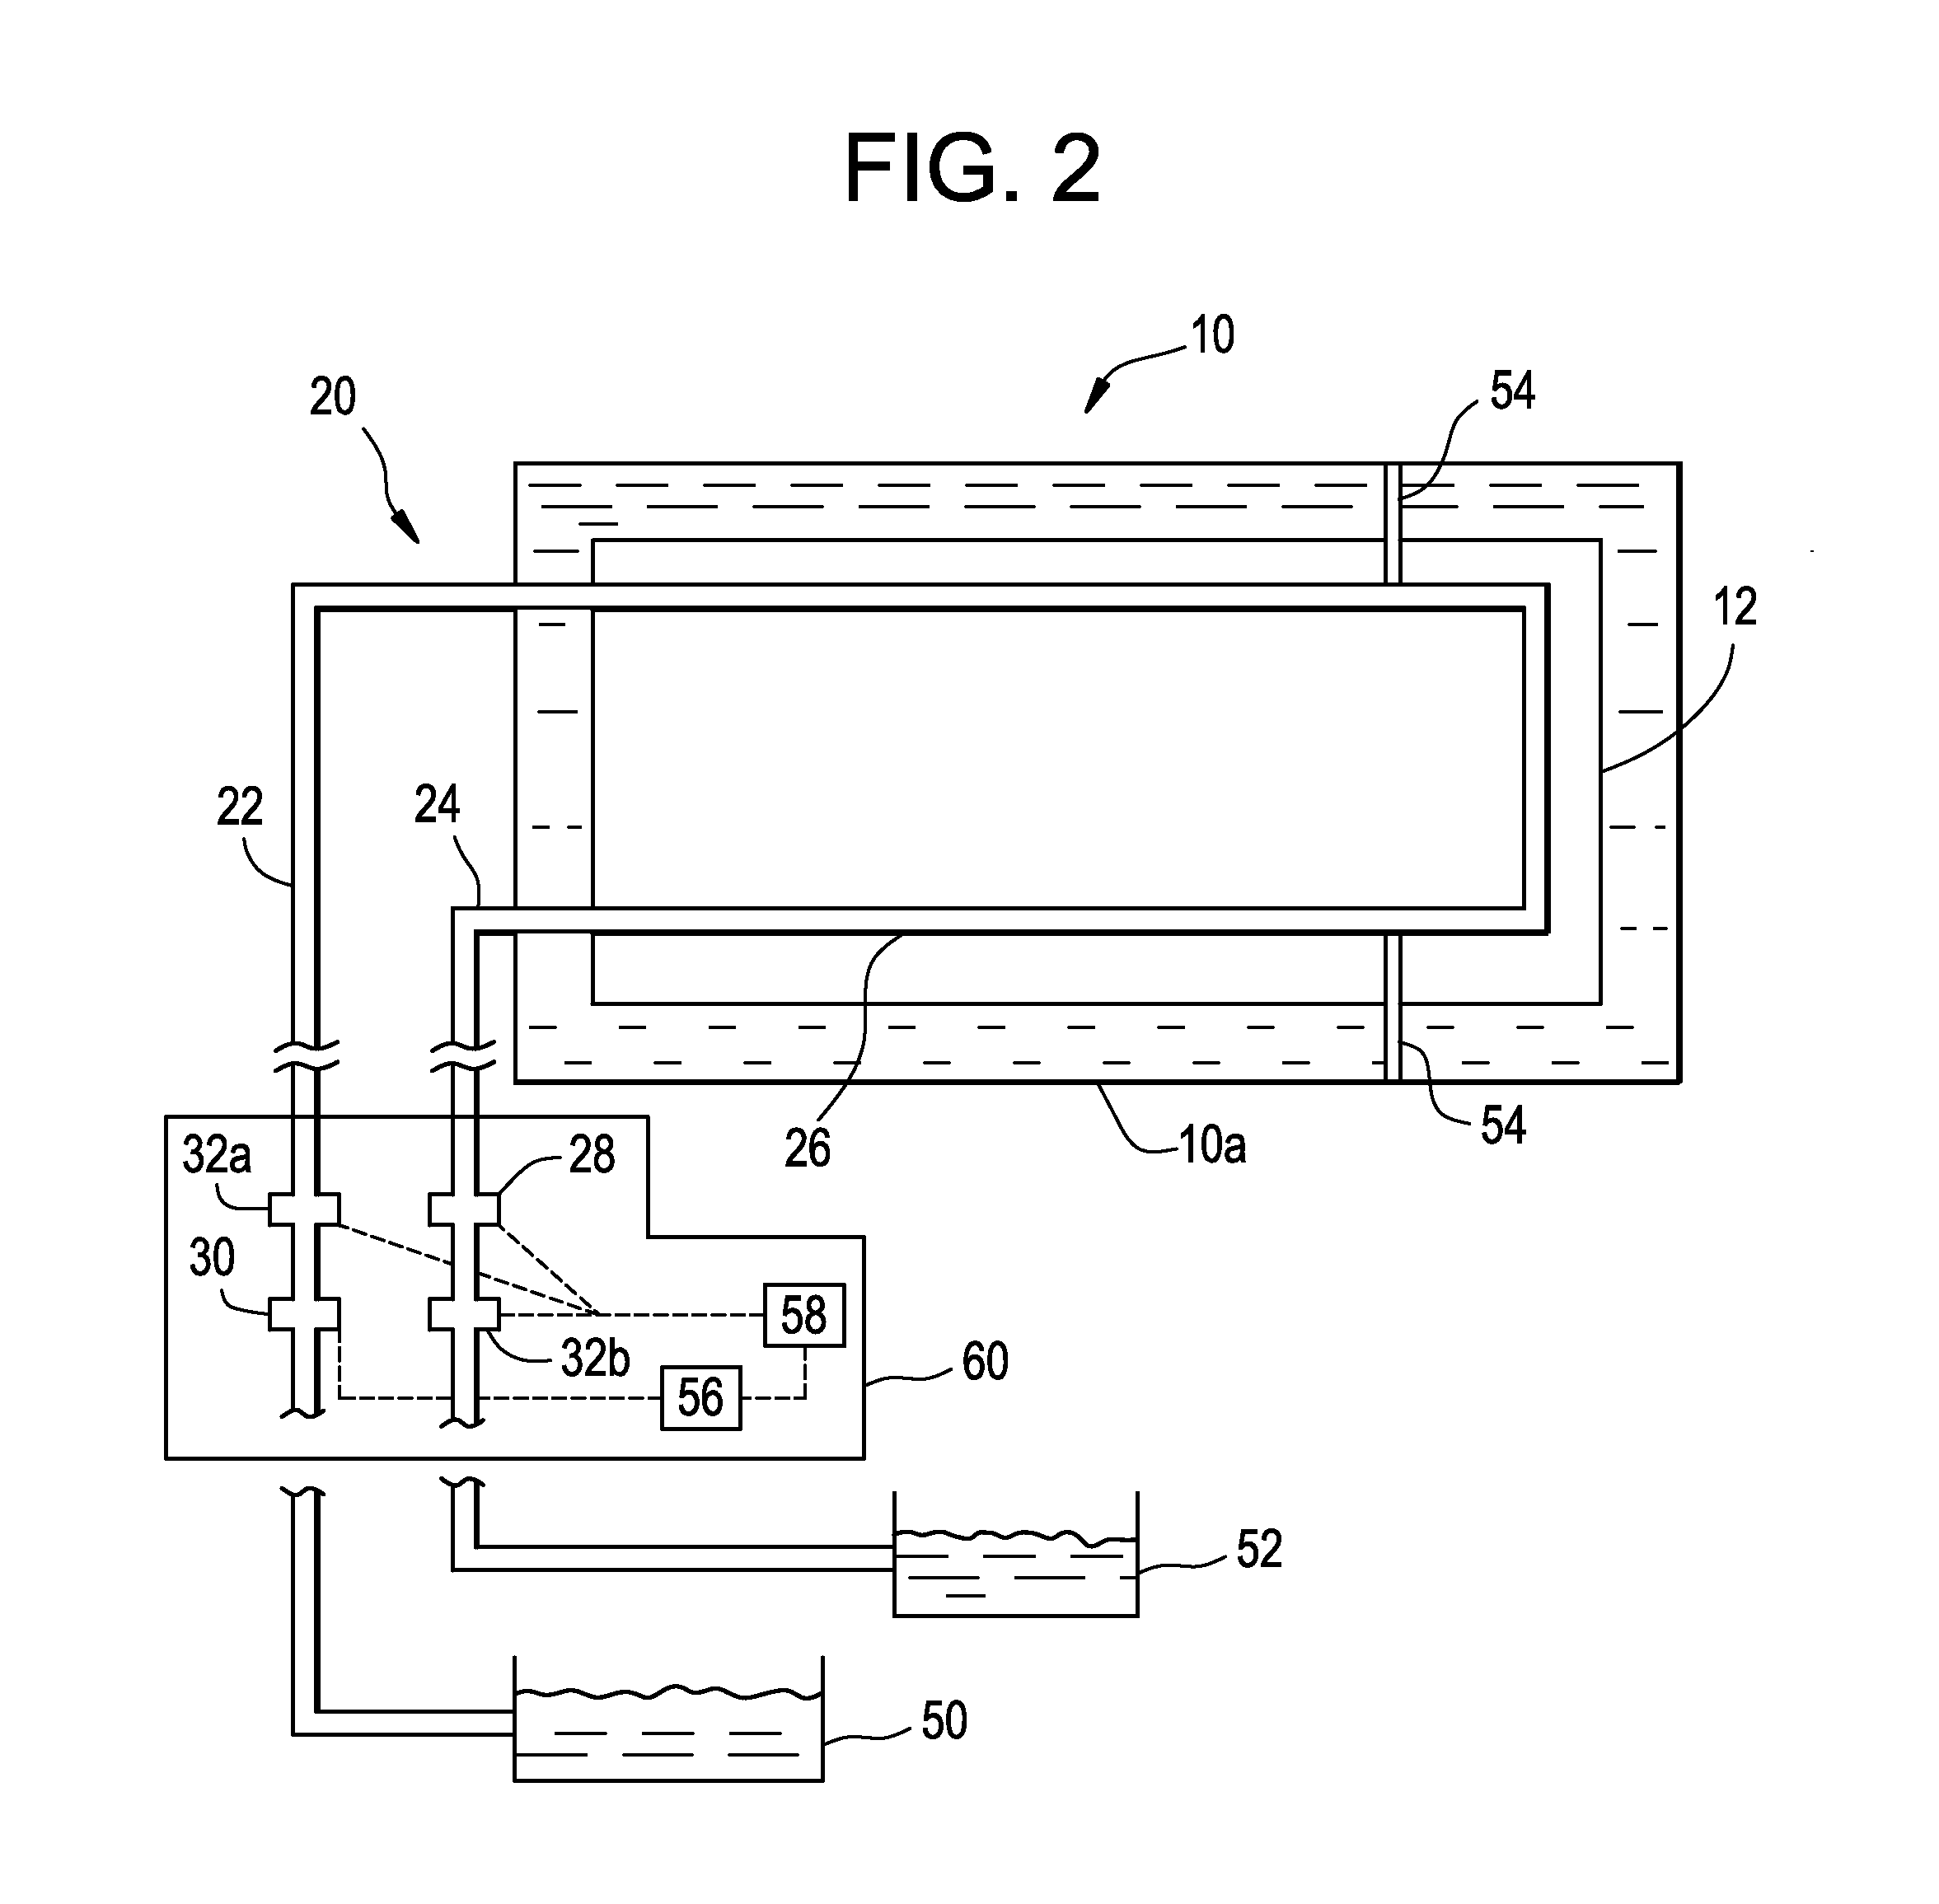 Method and apparatus for an alternative remote spent fuel pool cooling system for light water reactors